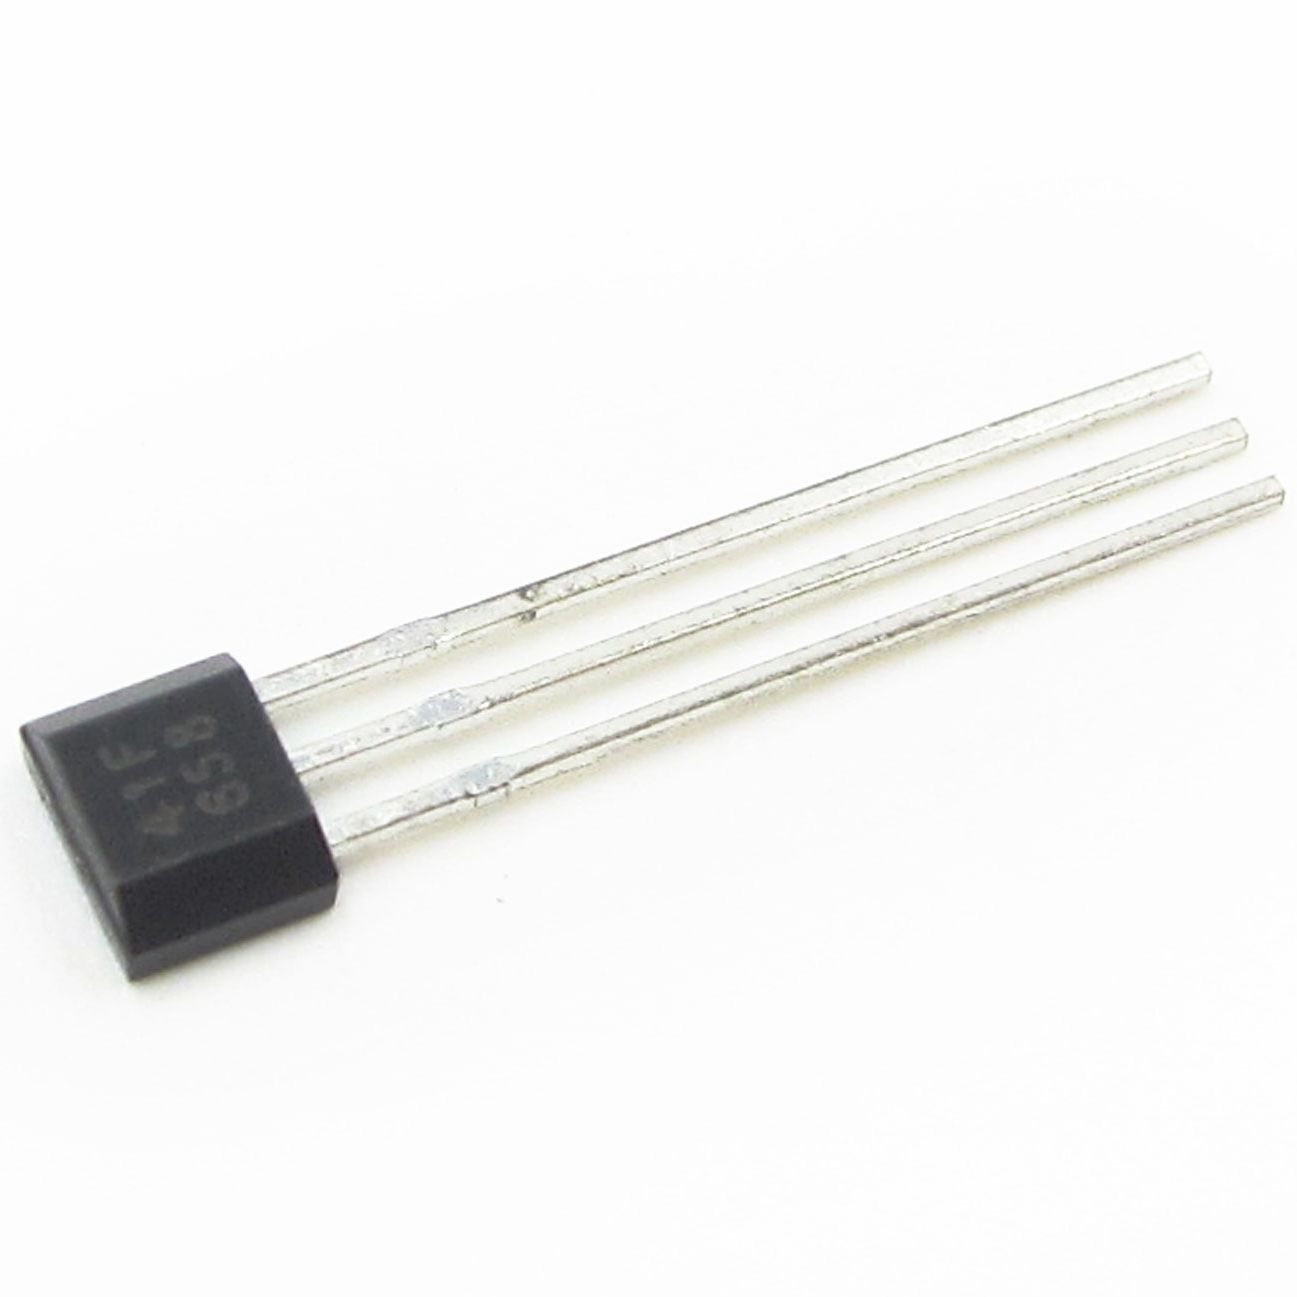 DN6835 :     hall-element linear 3-sip hallic
 : TO92S
 : Delco Semiconductor...